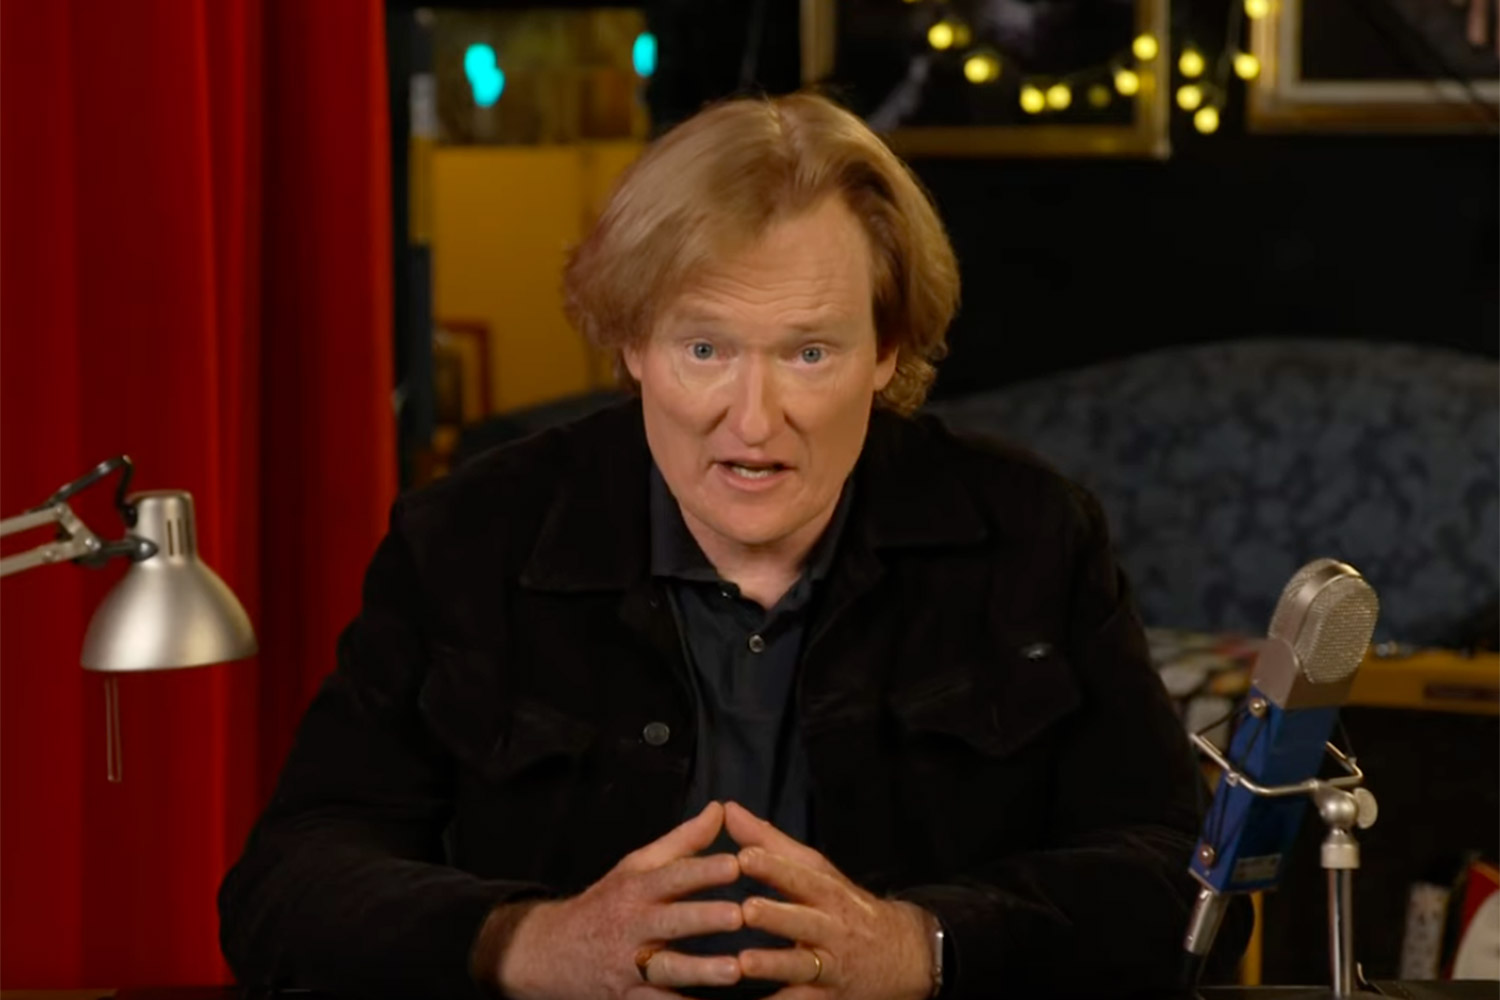 Conan O'Brien's Career Evolution is As Timely As Ever